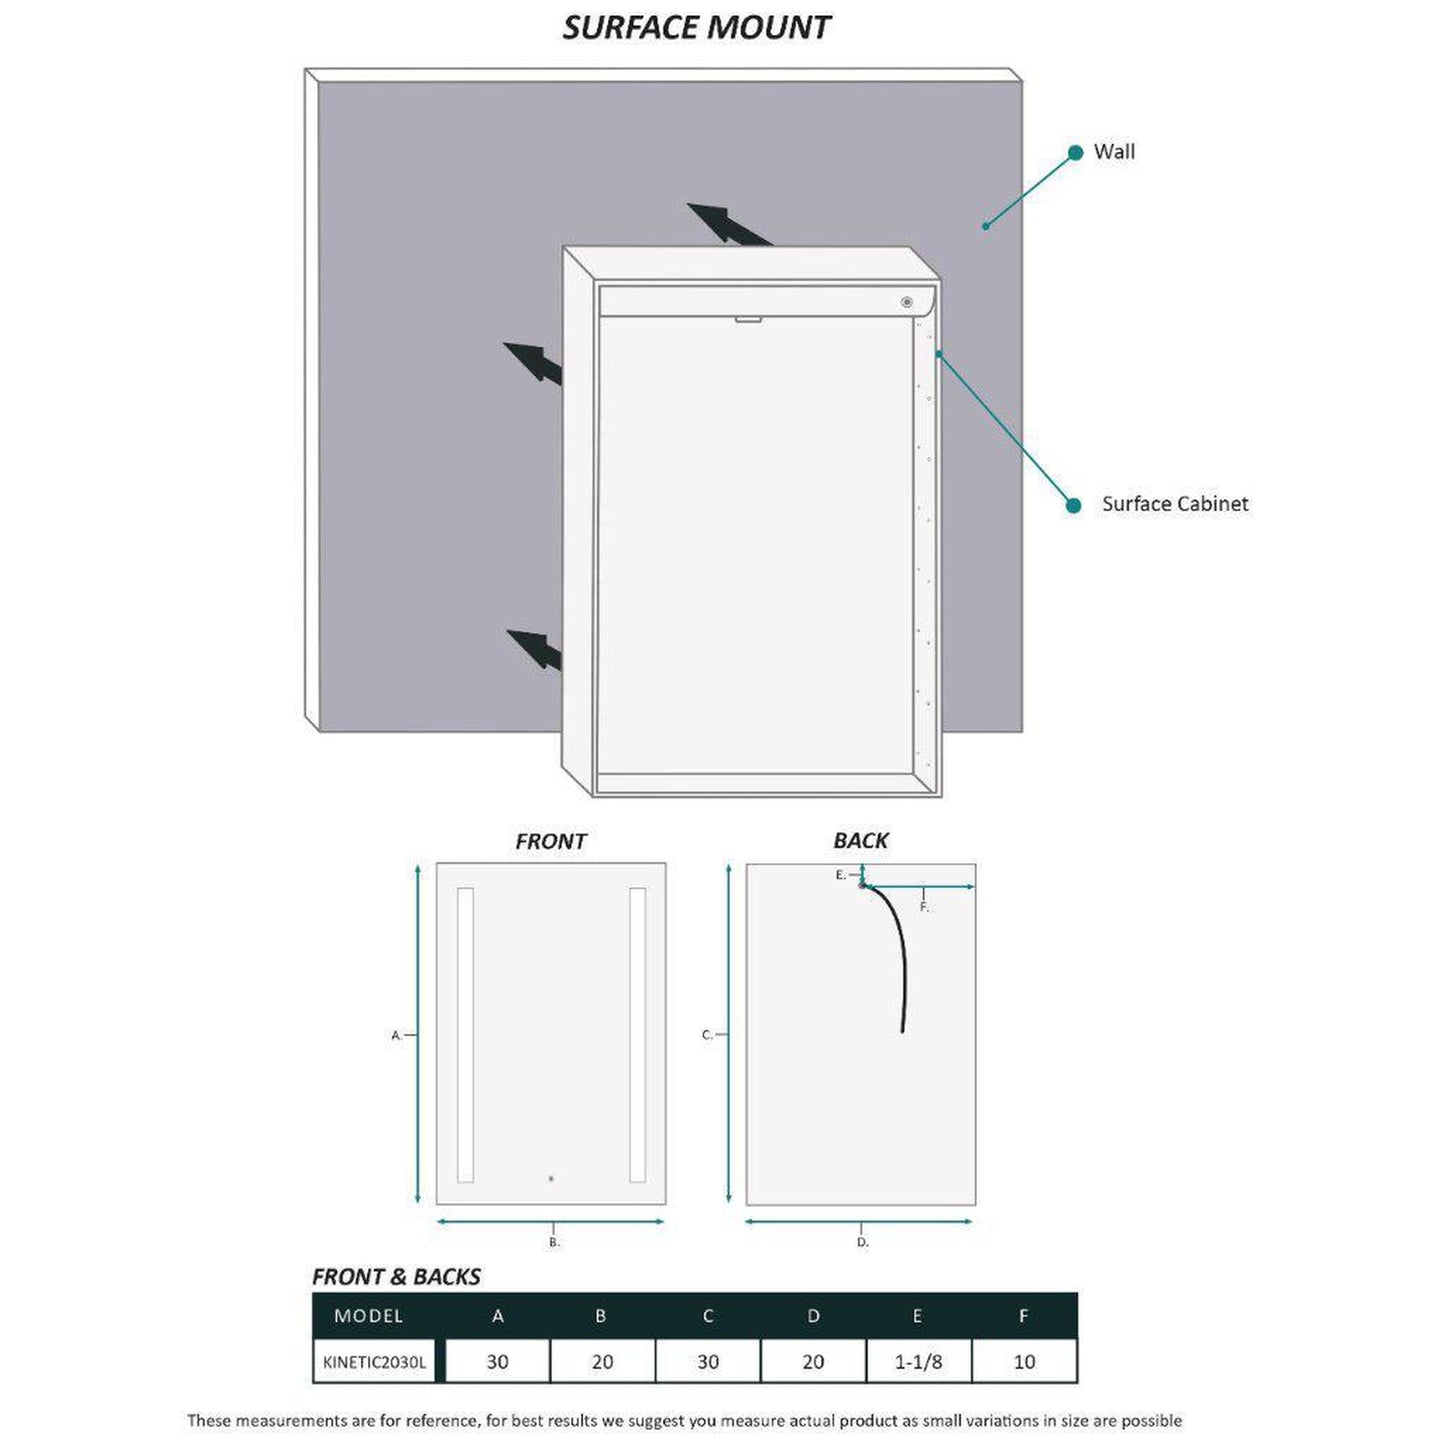 Krugg Reflections Kinetic 20" x 30" 6000K Single Left Opening Rectangular Recessed/Surface-Mount Illuminated Silver Backed LED Medicine Cabinet Mirror With Built-in Defogger, Dimmer and Electrical Outlet